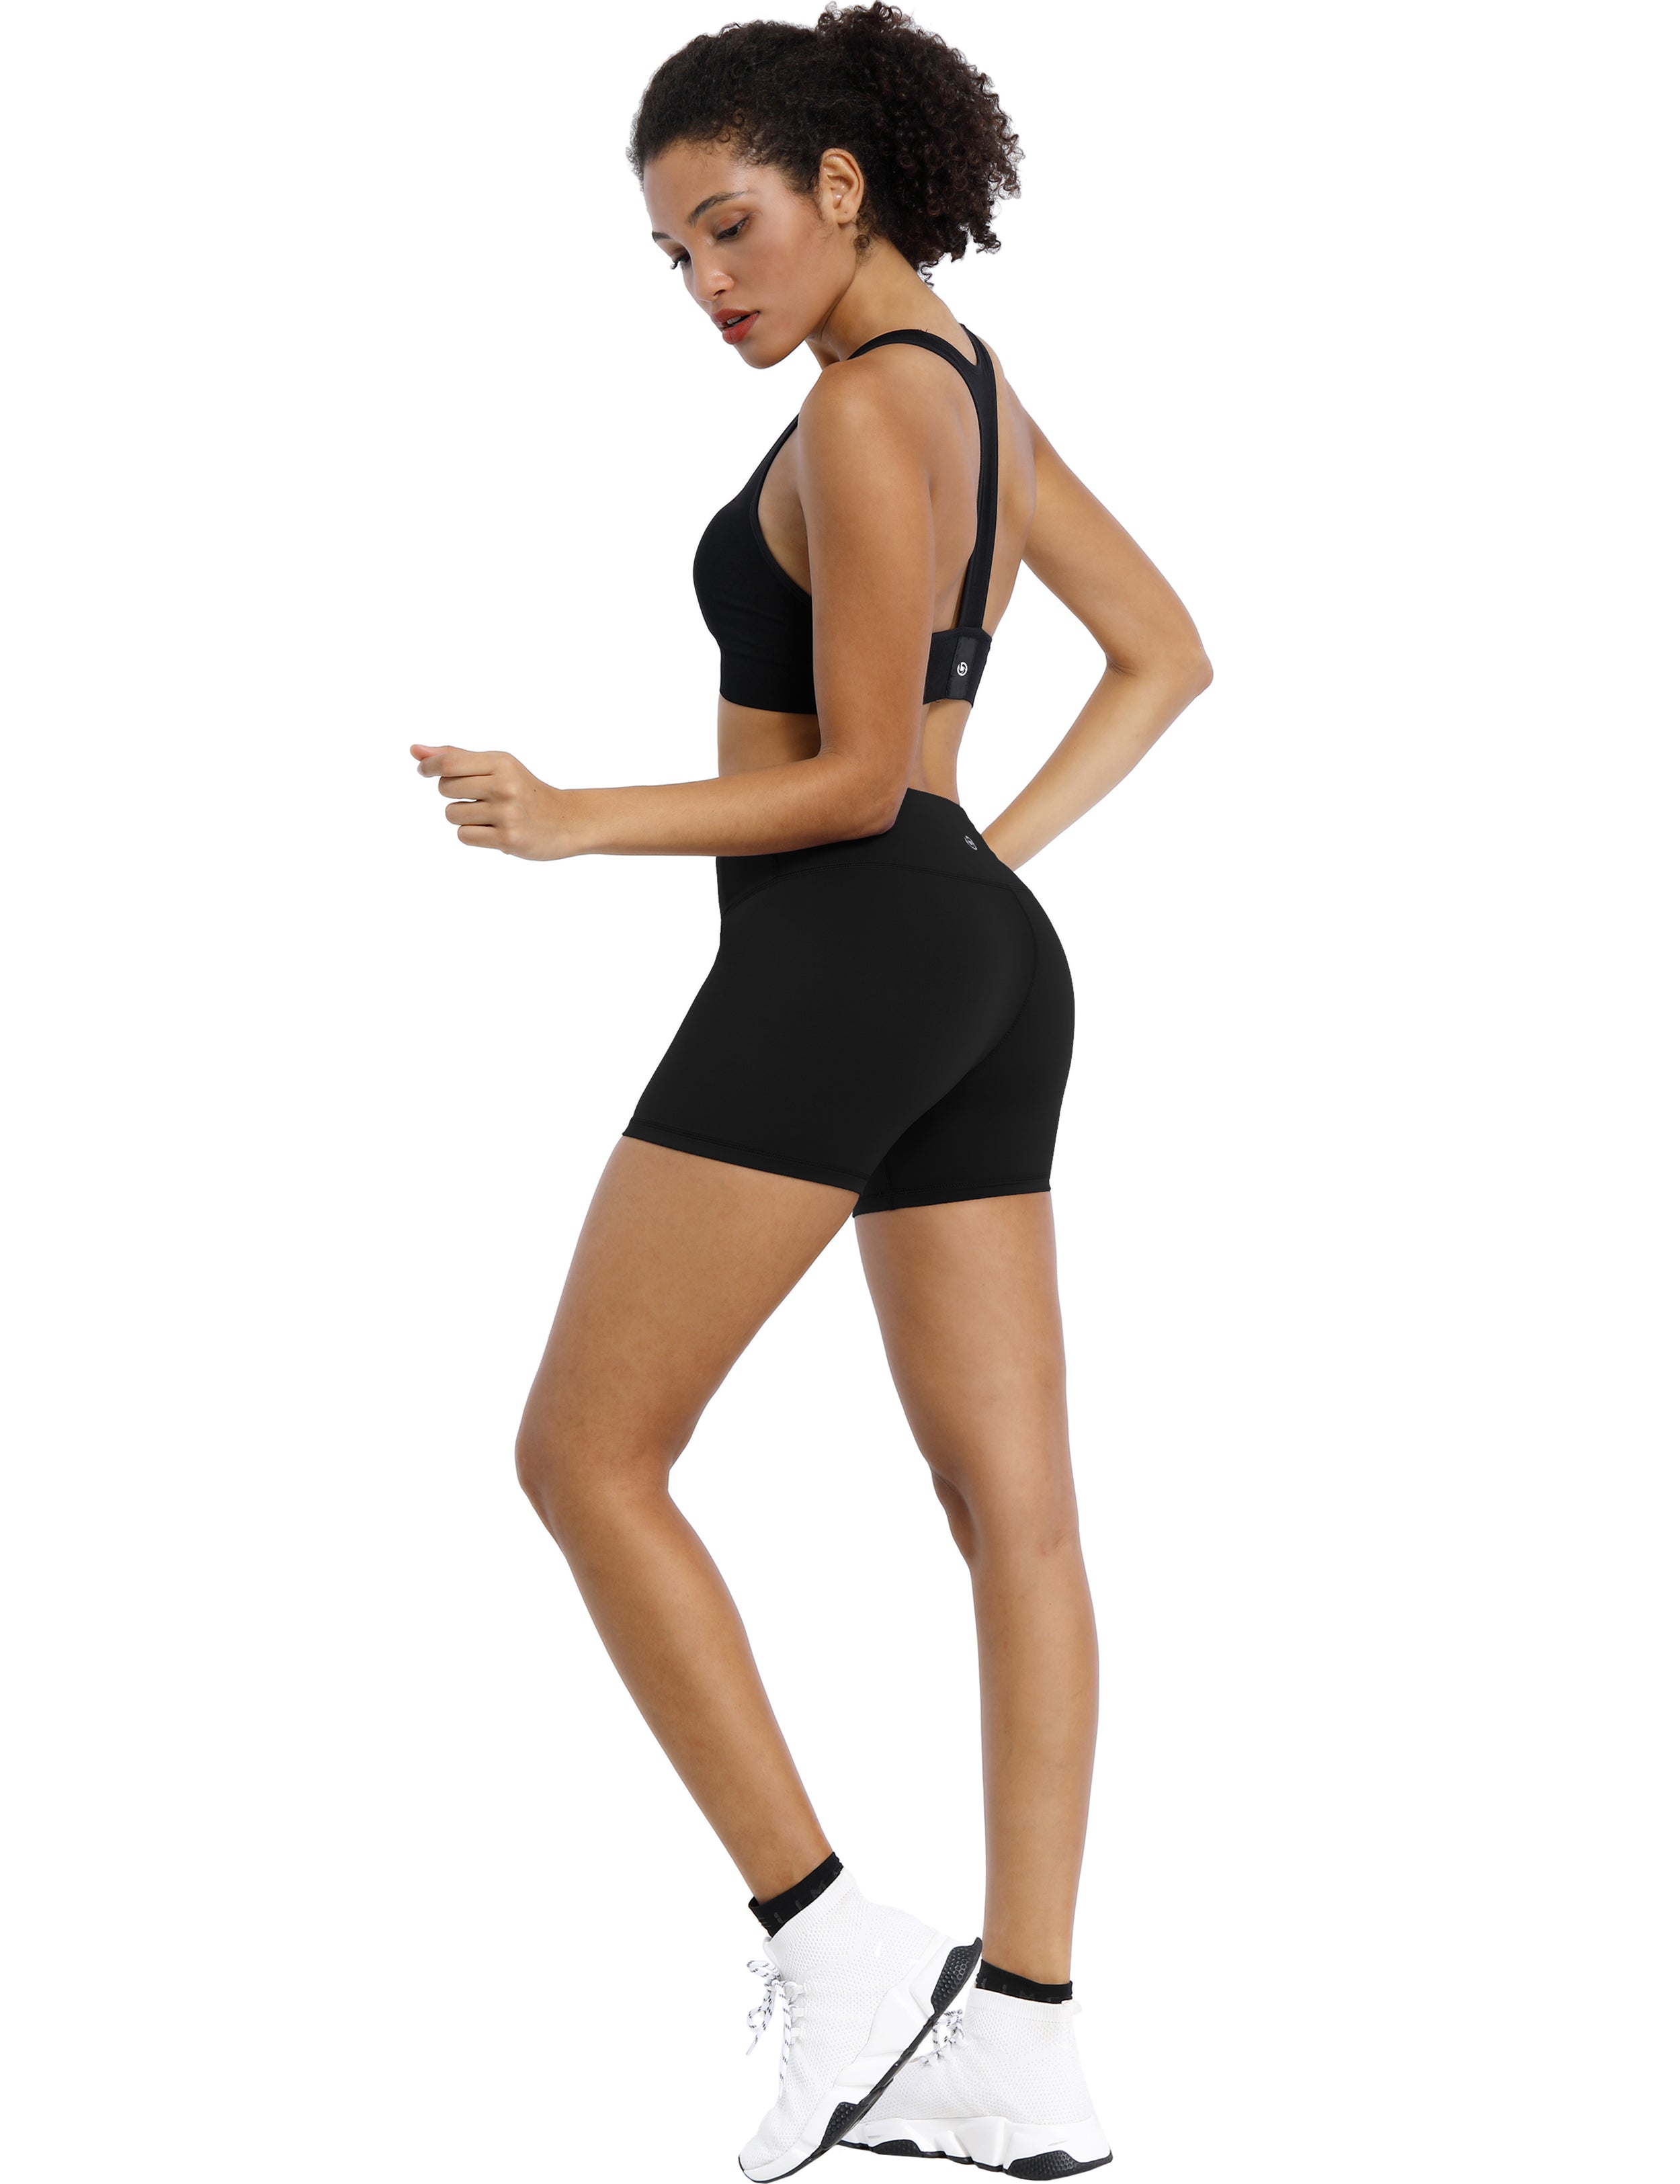 4" Yoga Shorts black Sleek, soft, smooth and totally comfortable: our newest style is here. Softest-ever fabric High elasticity High density 4-way stretch Fabric doesn't attract lint easily No see-through Moisture-wicking Machine wash 75% Nylon, 25% Spandex